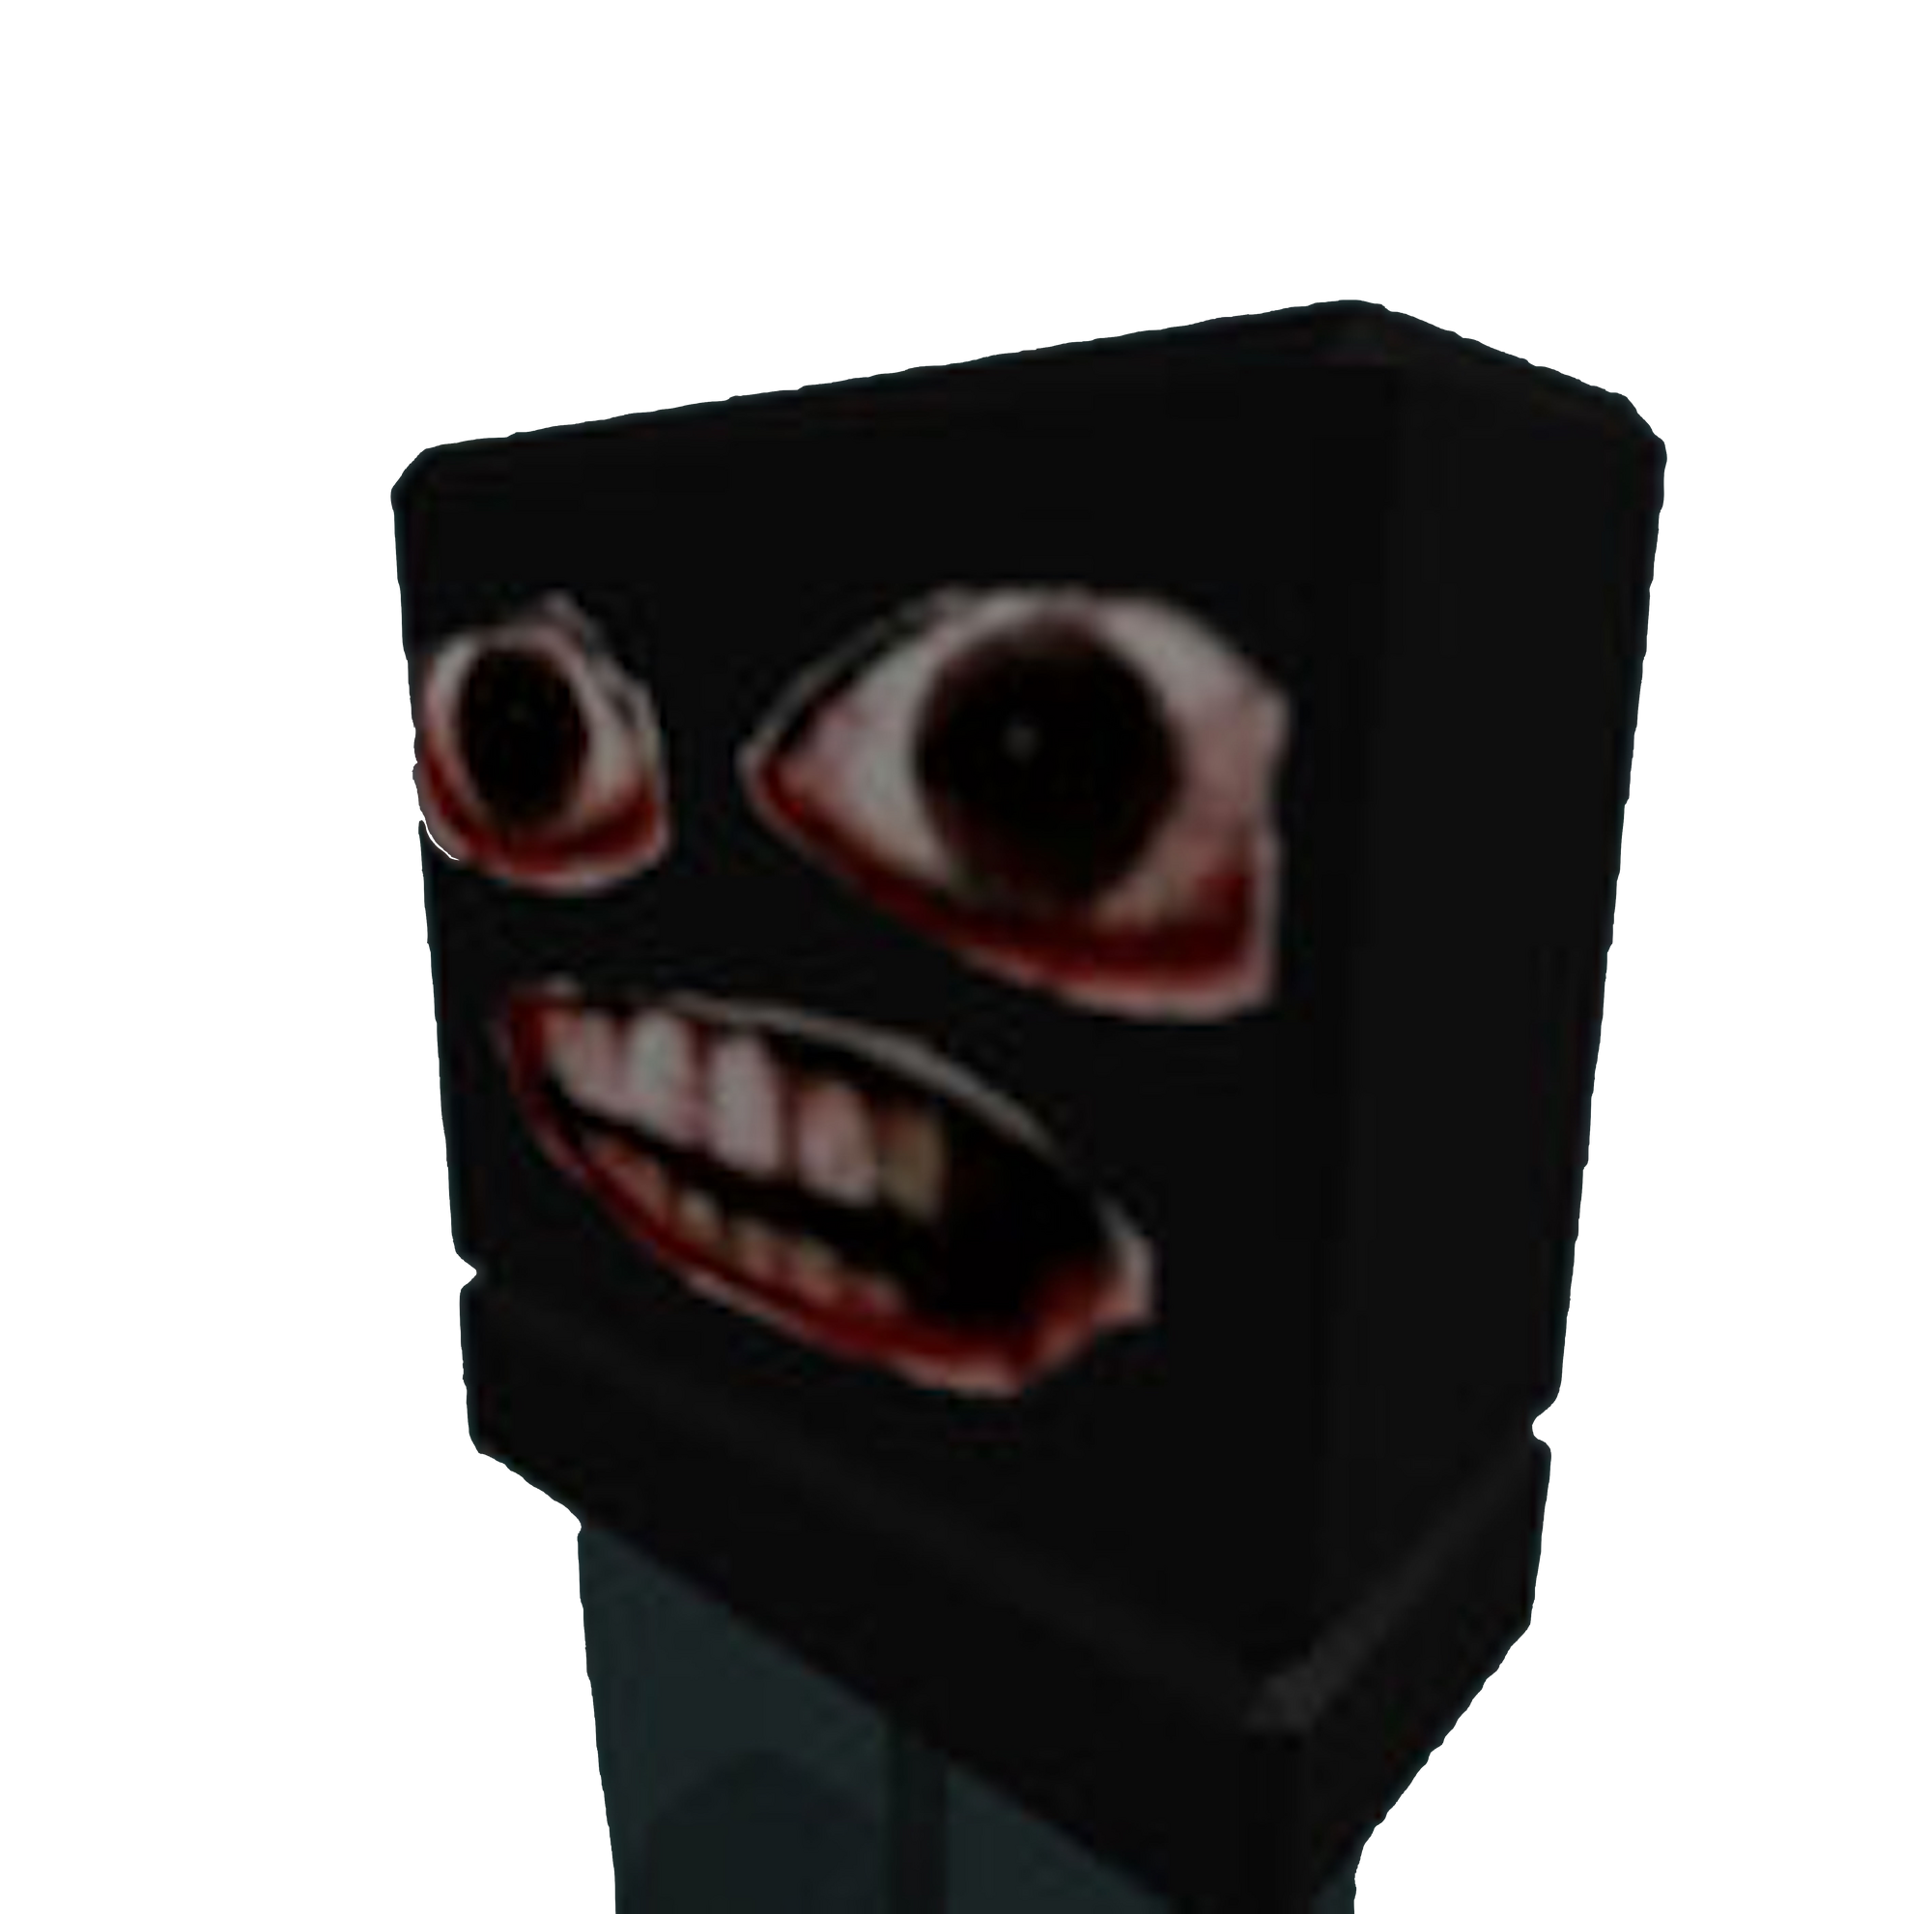 Roblox The Bear Game Scary Skin - ghoulthia at roblox on twitter ilyilyilyt